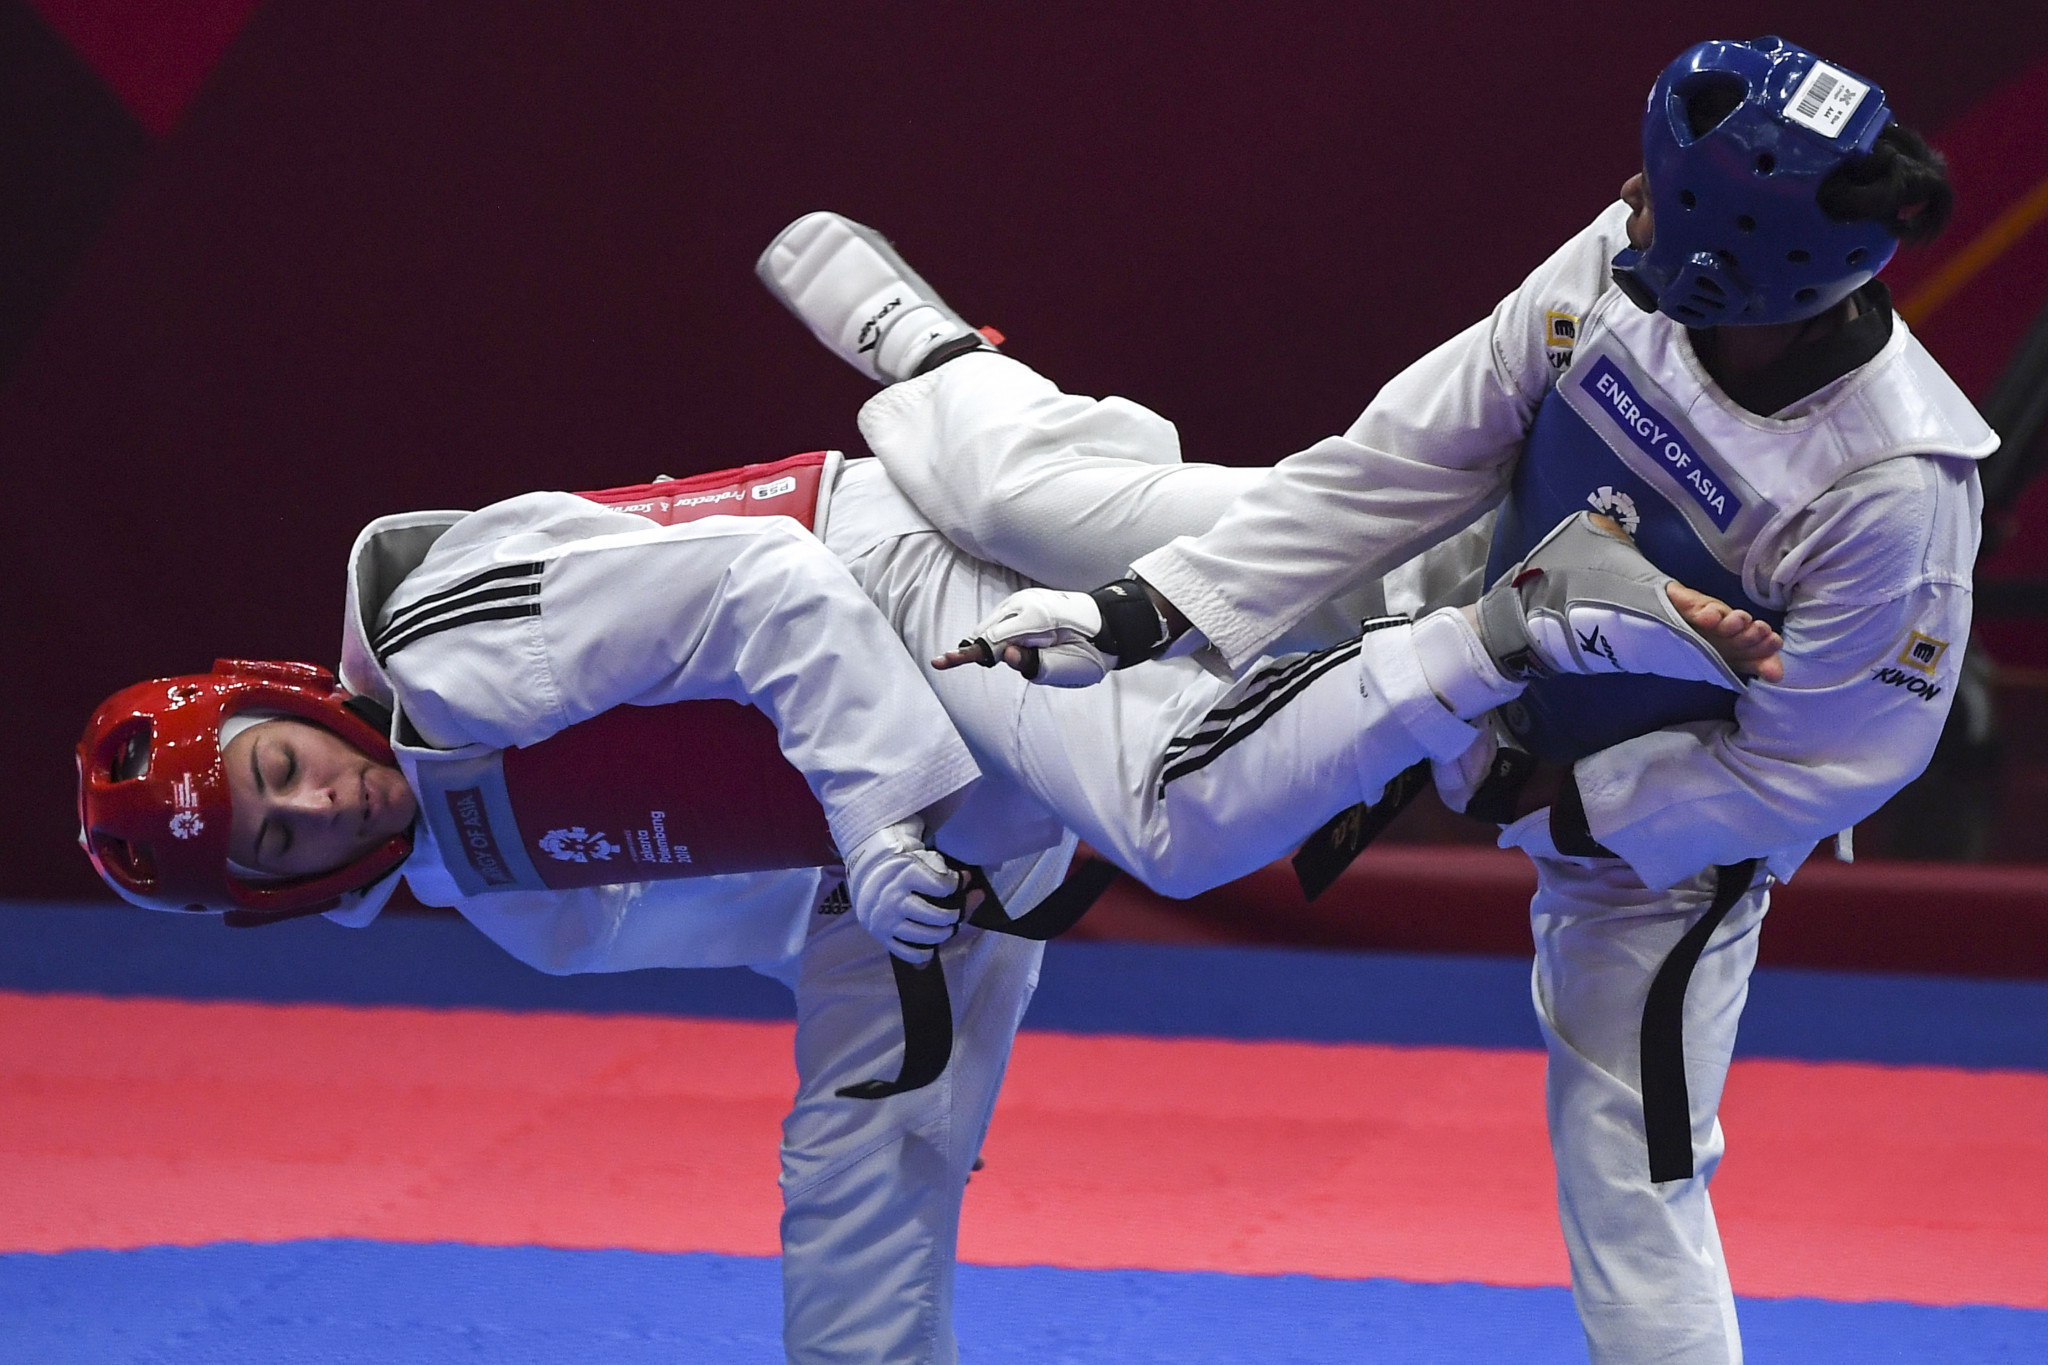 Jordan's Julyana Al Sadeq secured her country's fourth gold medal in the history of the Asian Games by winning the women's under 67kg competition at Jakarta Palembang 2018 ©Getty Images